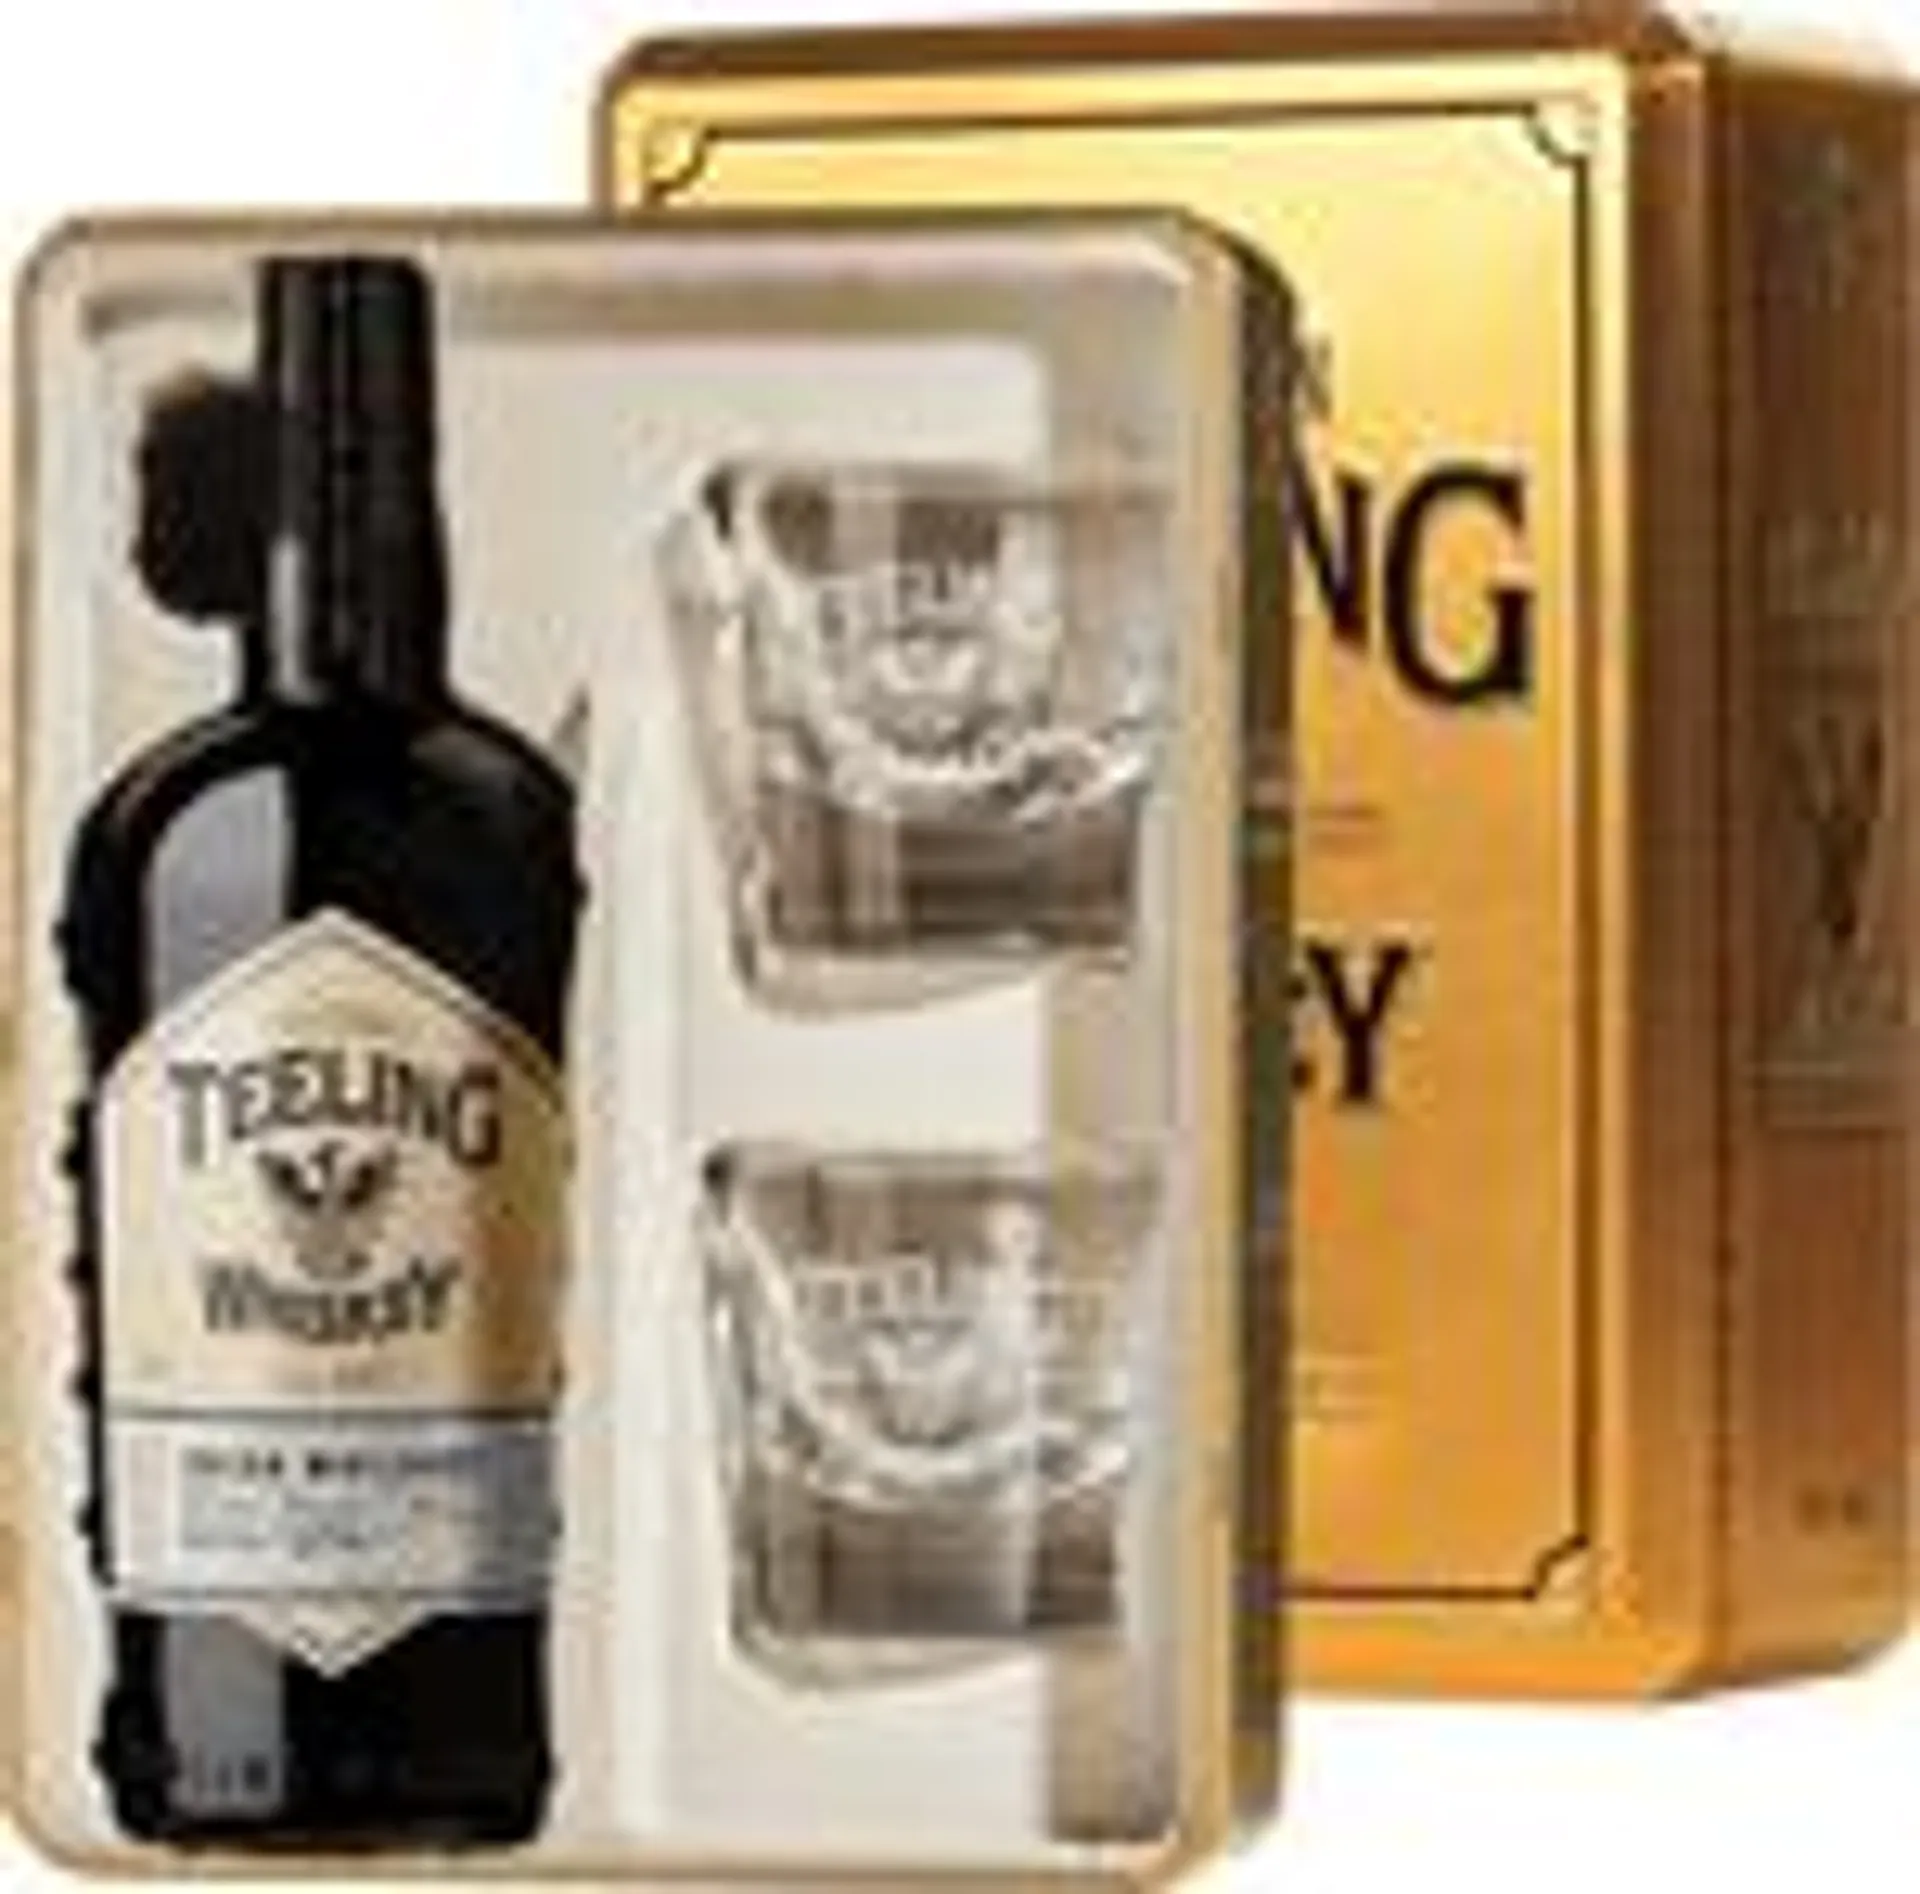 Teeling Small Batch Glass Pack 70cl